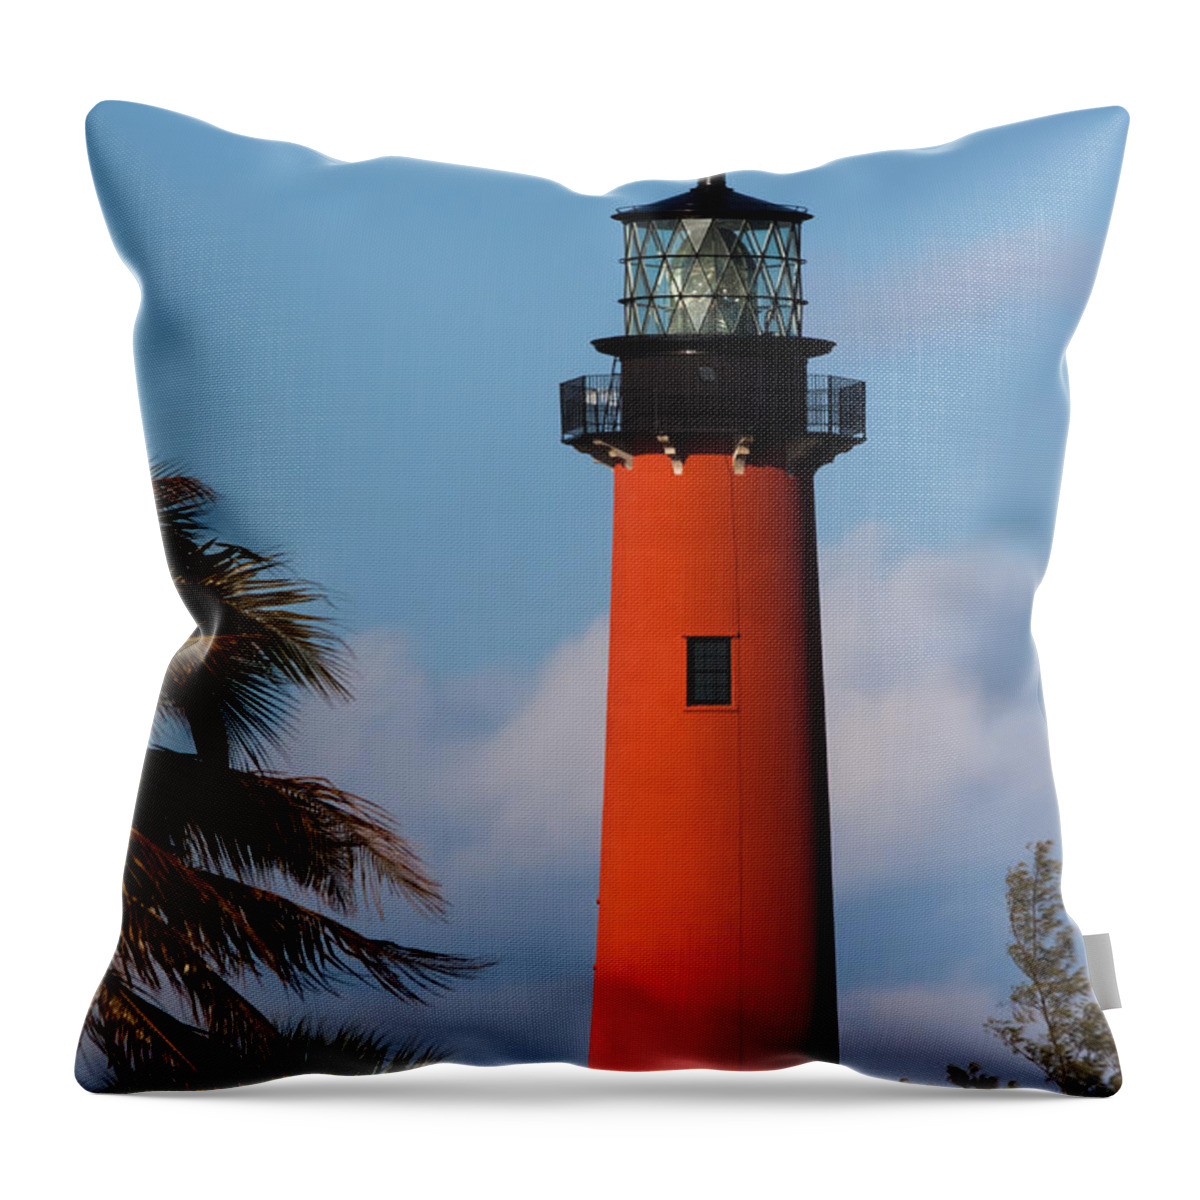 Architecture Throw Pillow featuring the photograph Jupiter Inlet Lighthouse by Ed Gleichman